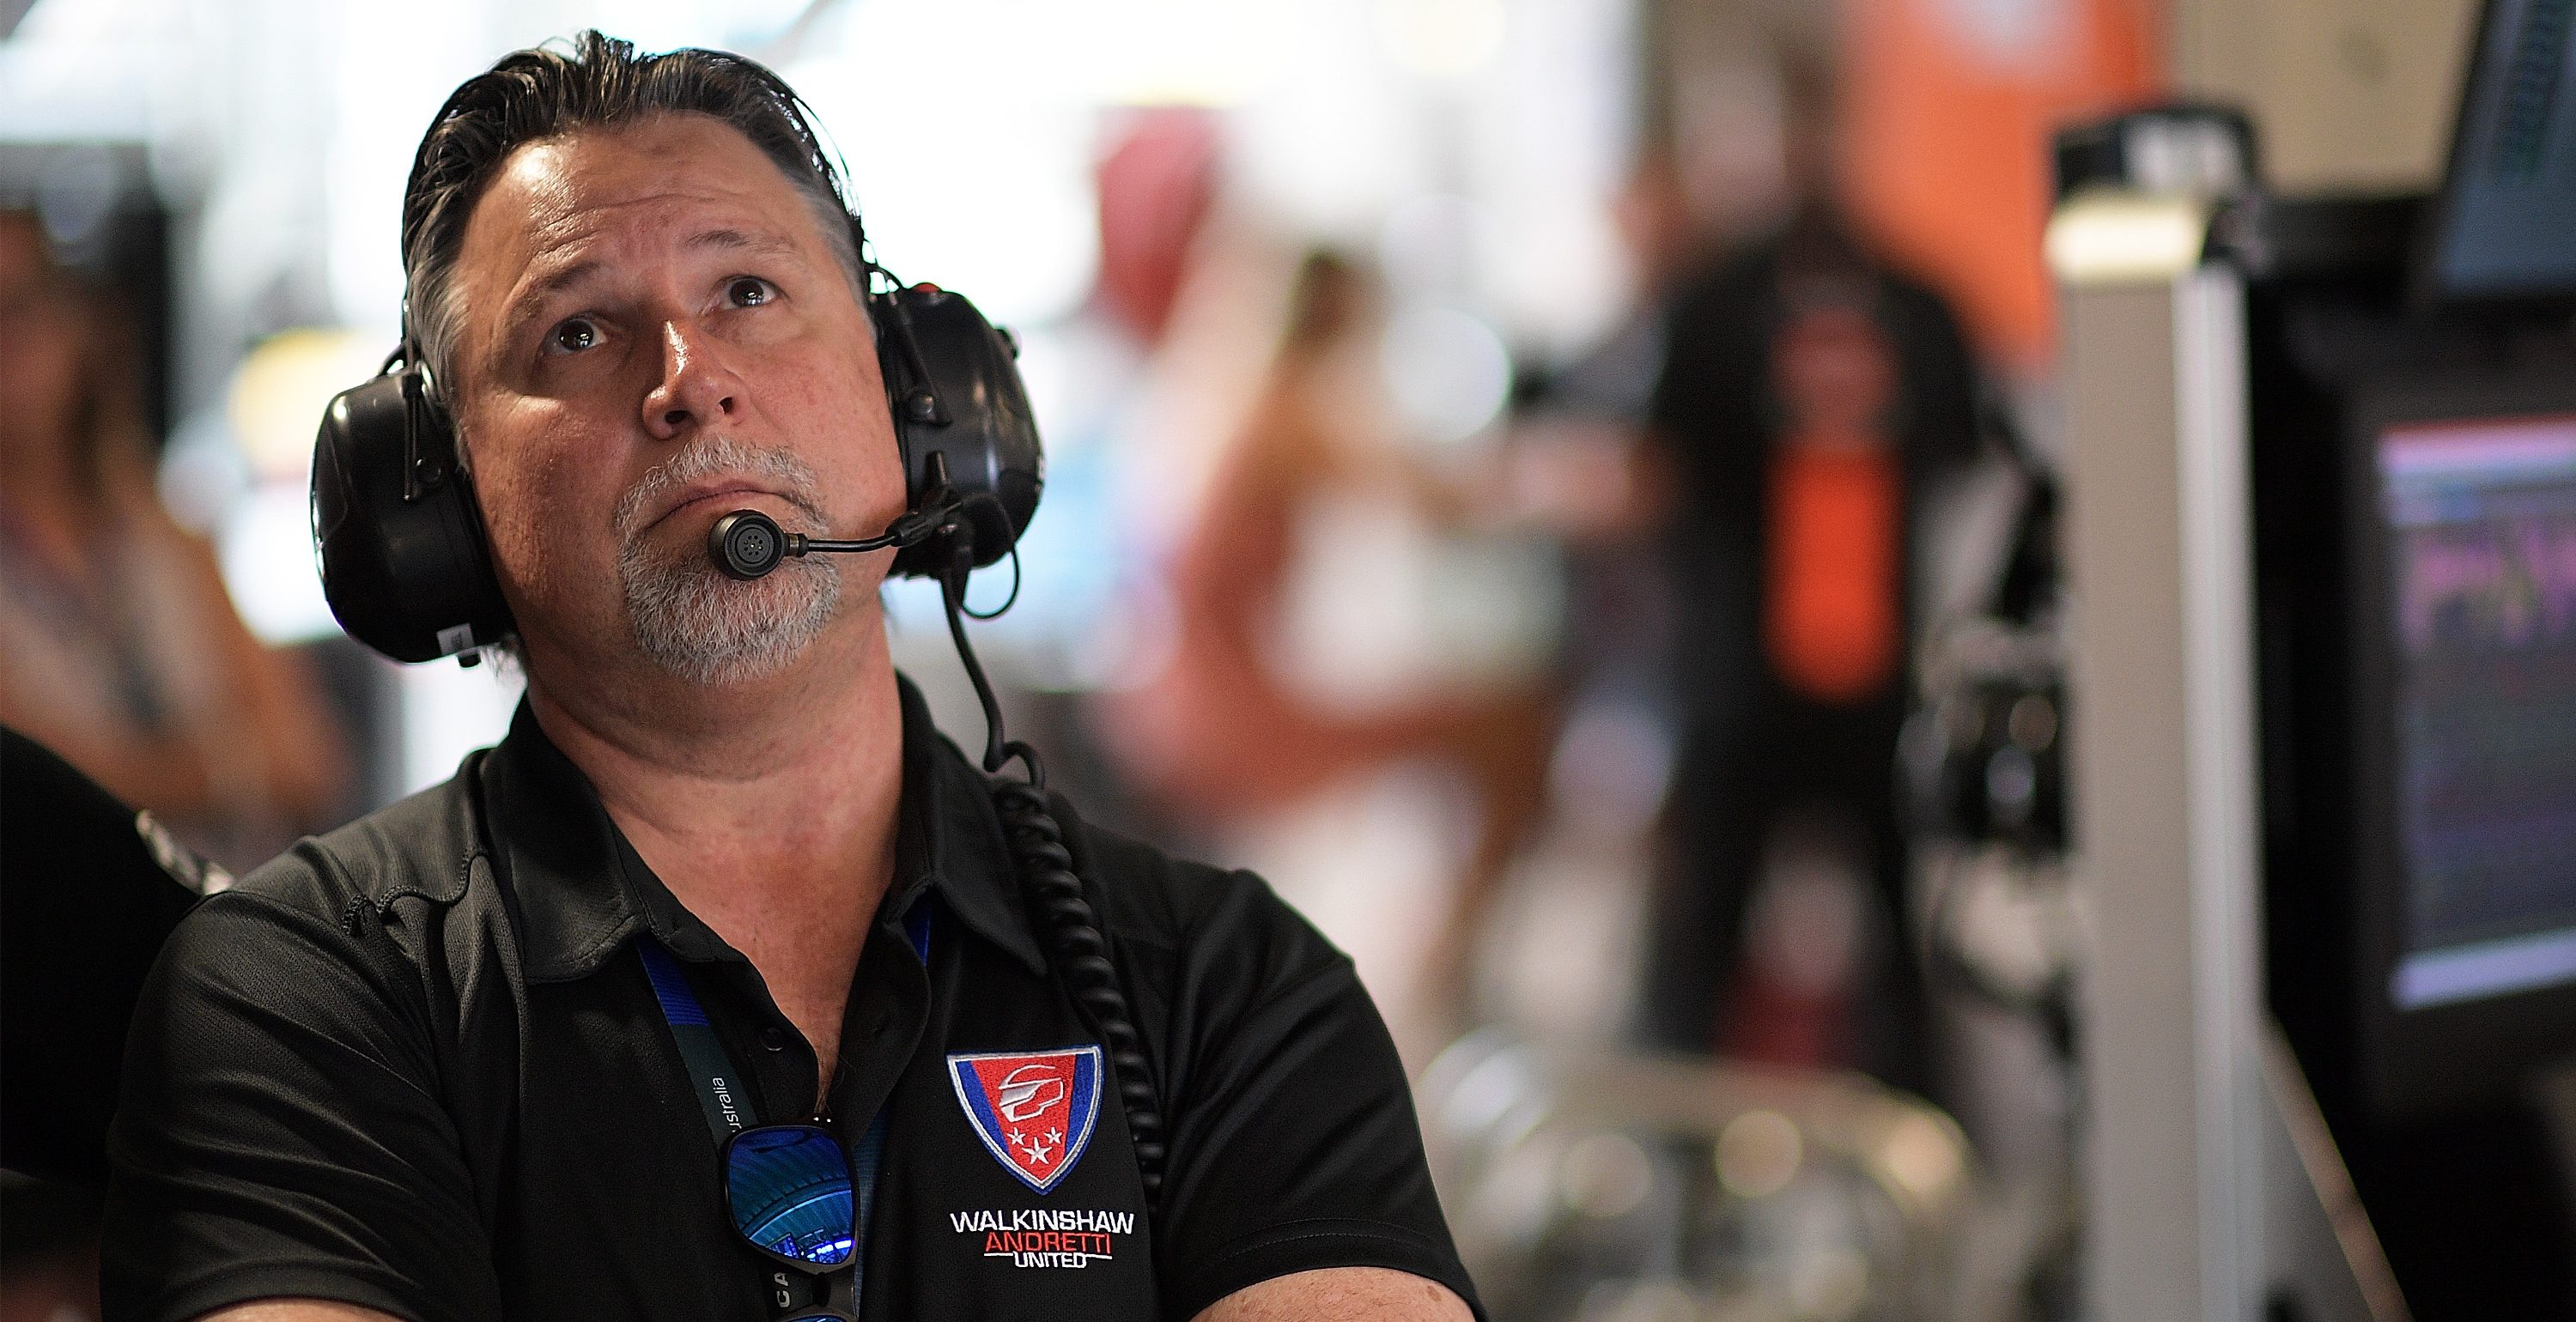 ADELAIDE, AUSTRALIA - MARCH 02: Michael Andretti team owner of Walkinshaw Andretti United looks on during qualifying for Supercars Adelaide 500 on March 2, 2018 in Adelaide, Australia.